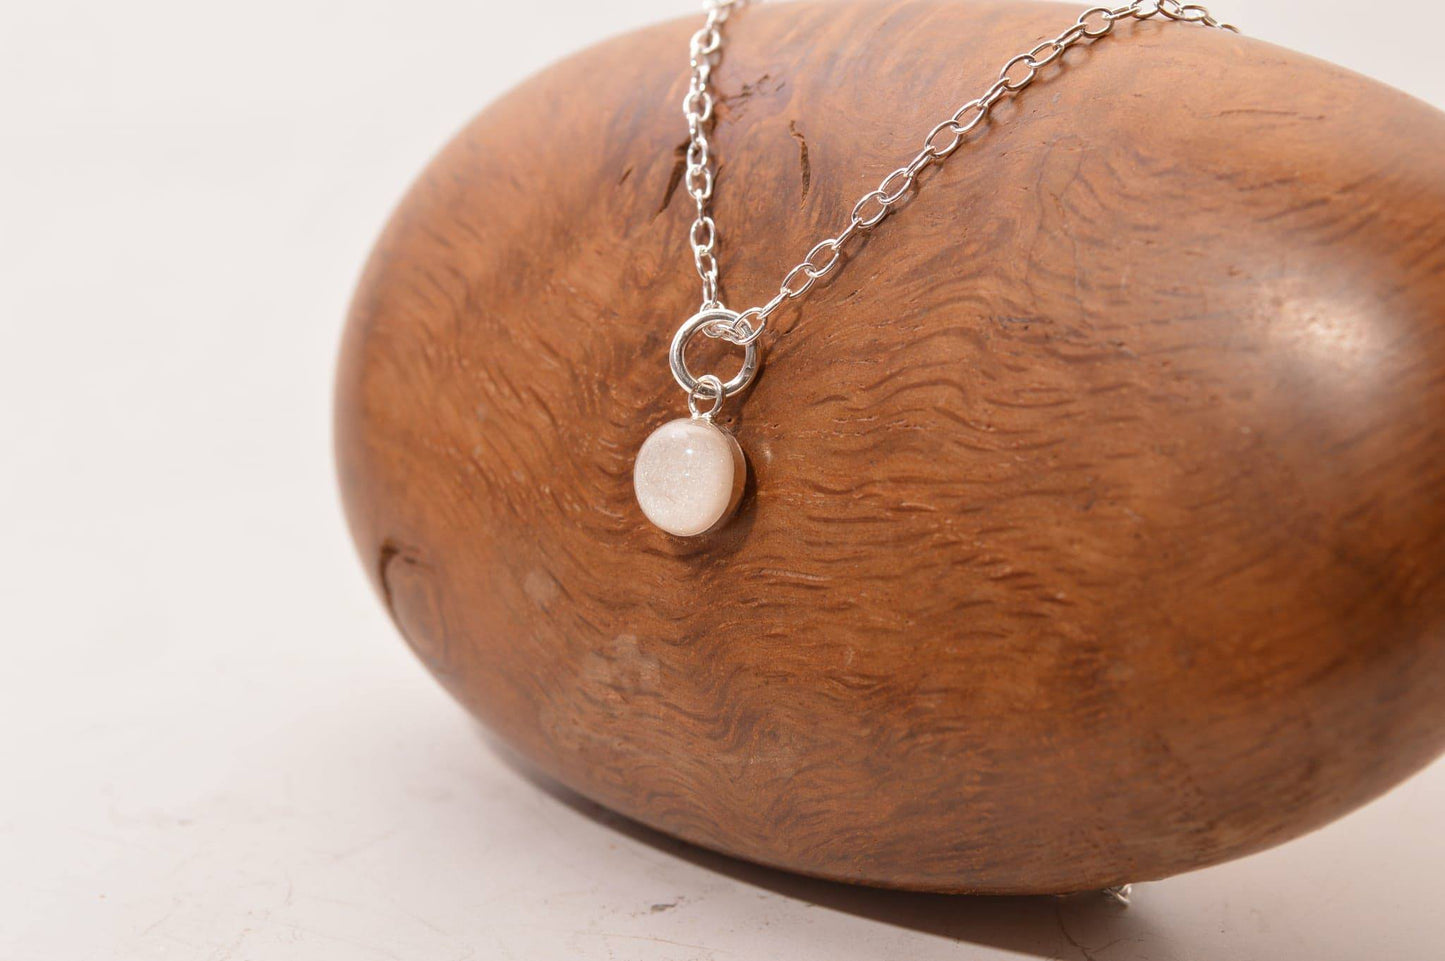 Round sterling silver backed pendant